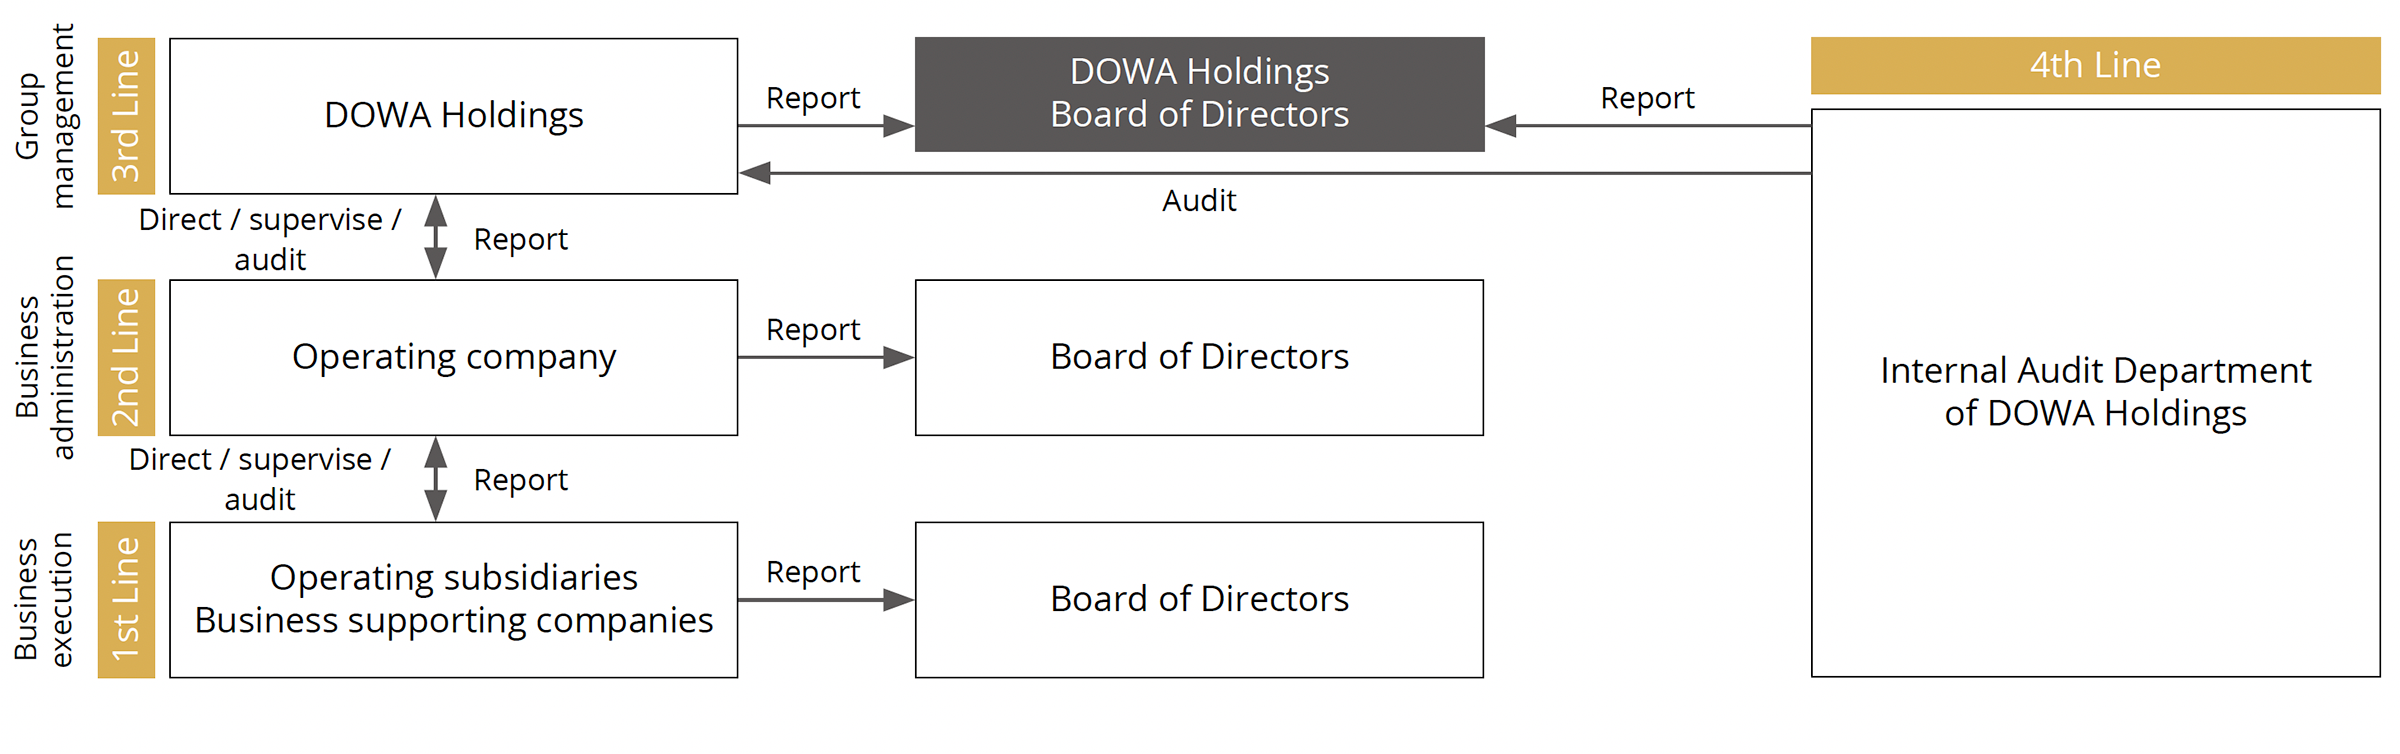 Four Lines Model (Internal Control System)